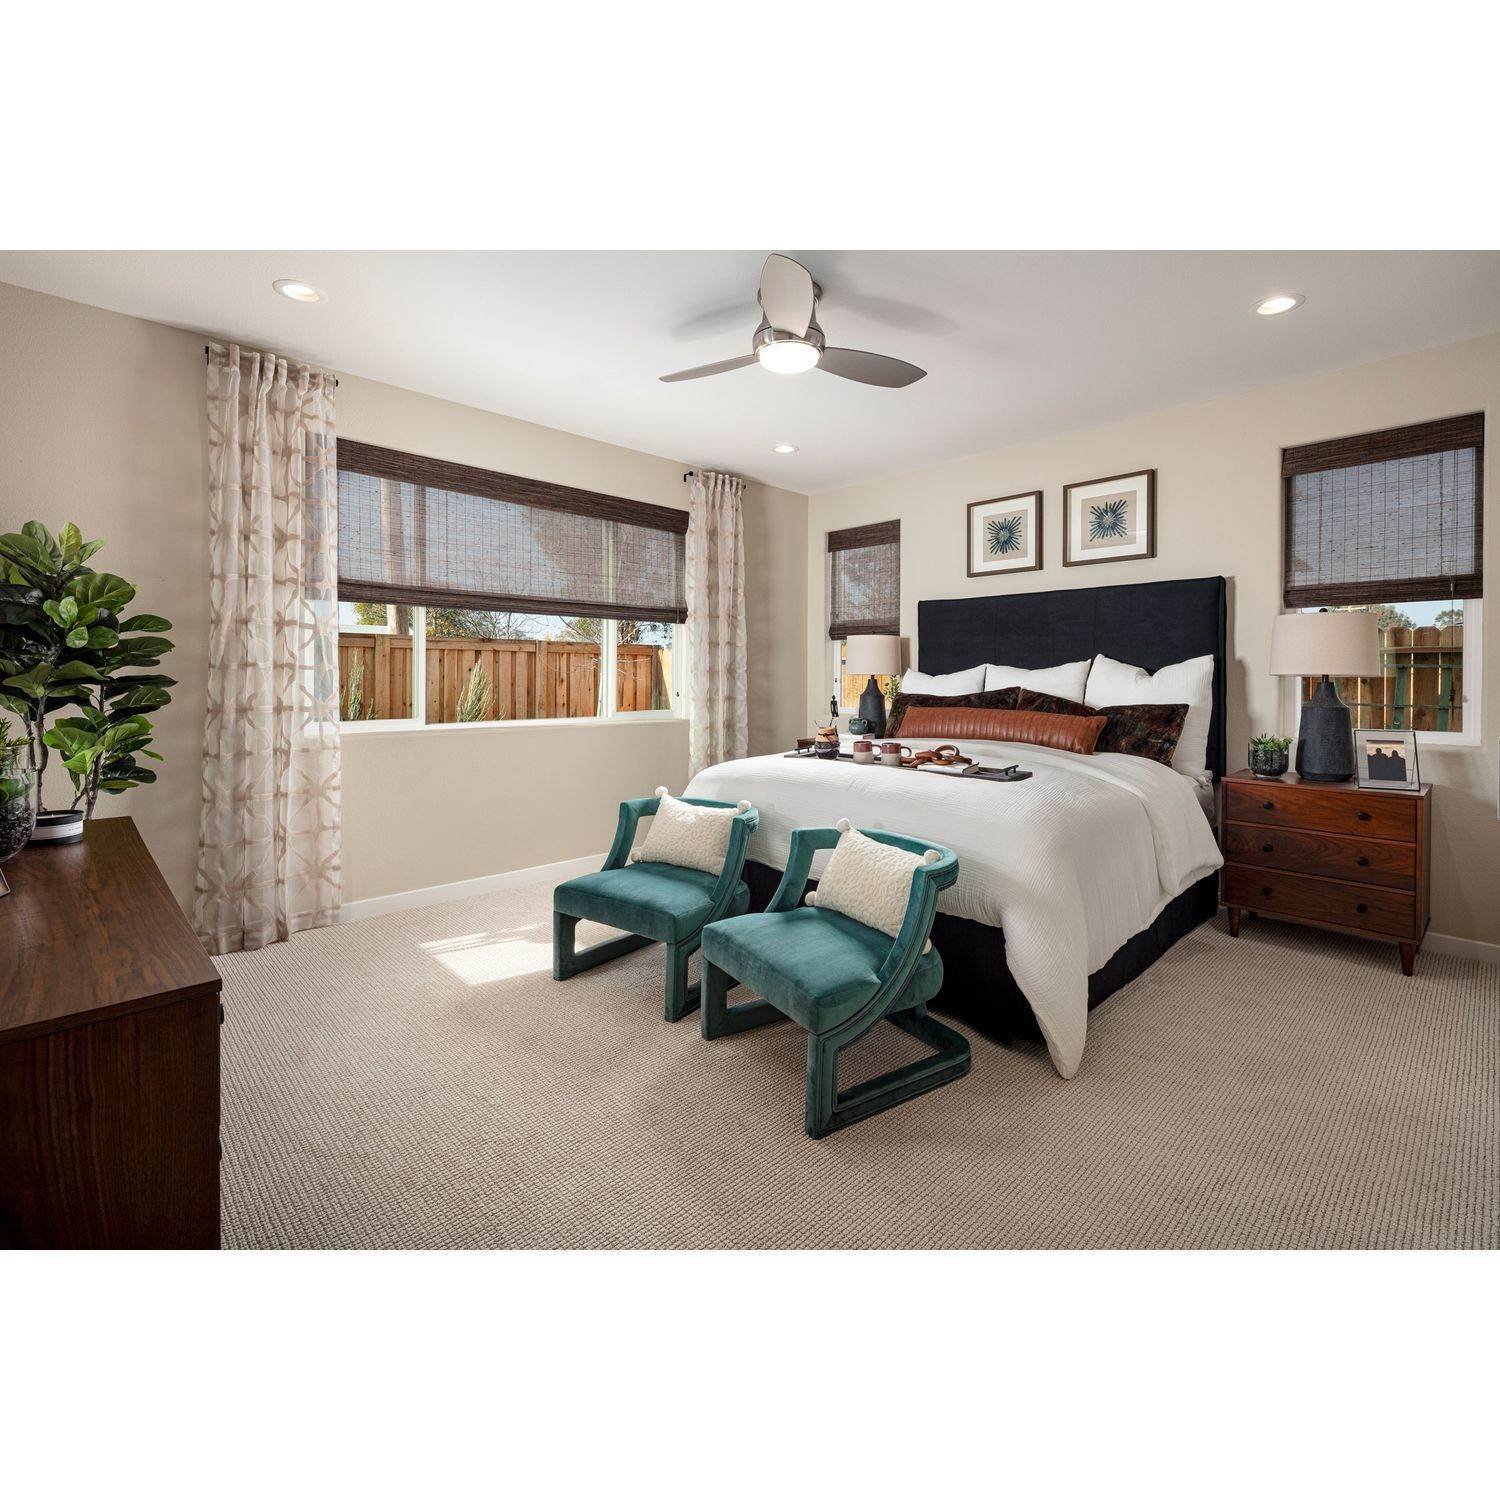 41. Cresleigh Havenwood xây dựng tại 758 Havenwood Drive, Lincoln, CA 95648